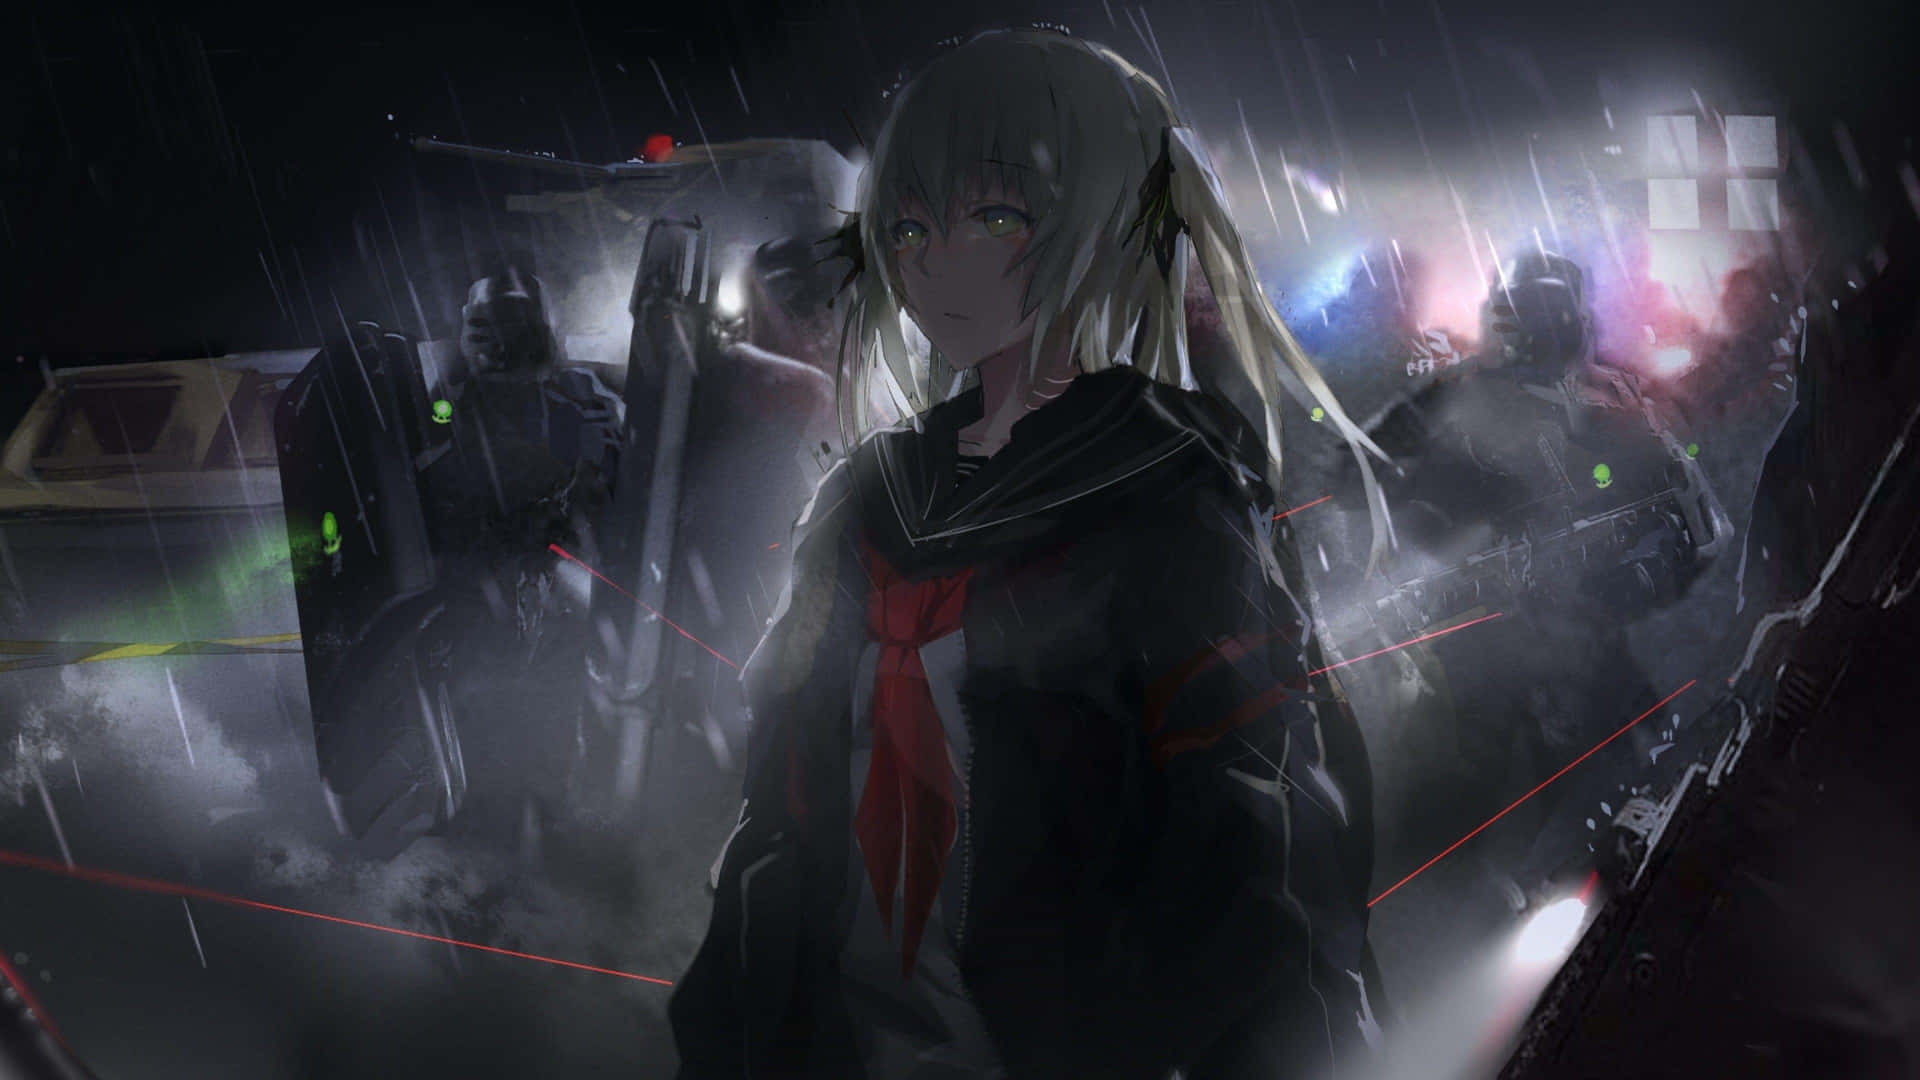 Mysterious and Alluring Dark Anime Girl Wallpaper